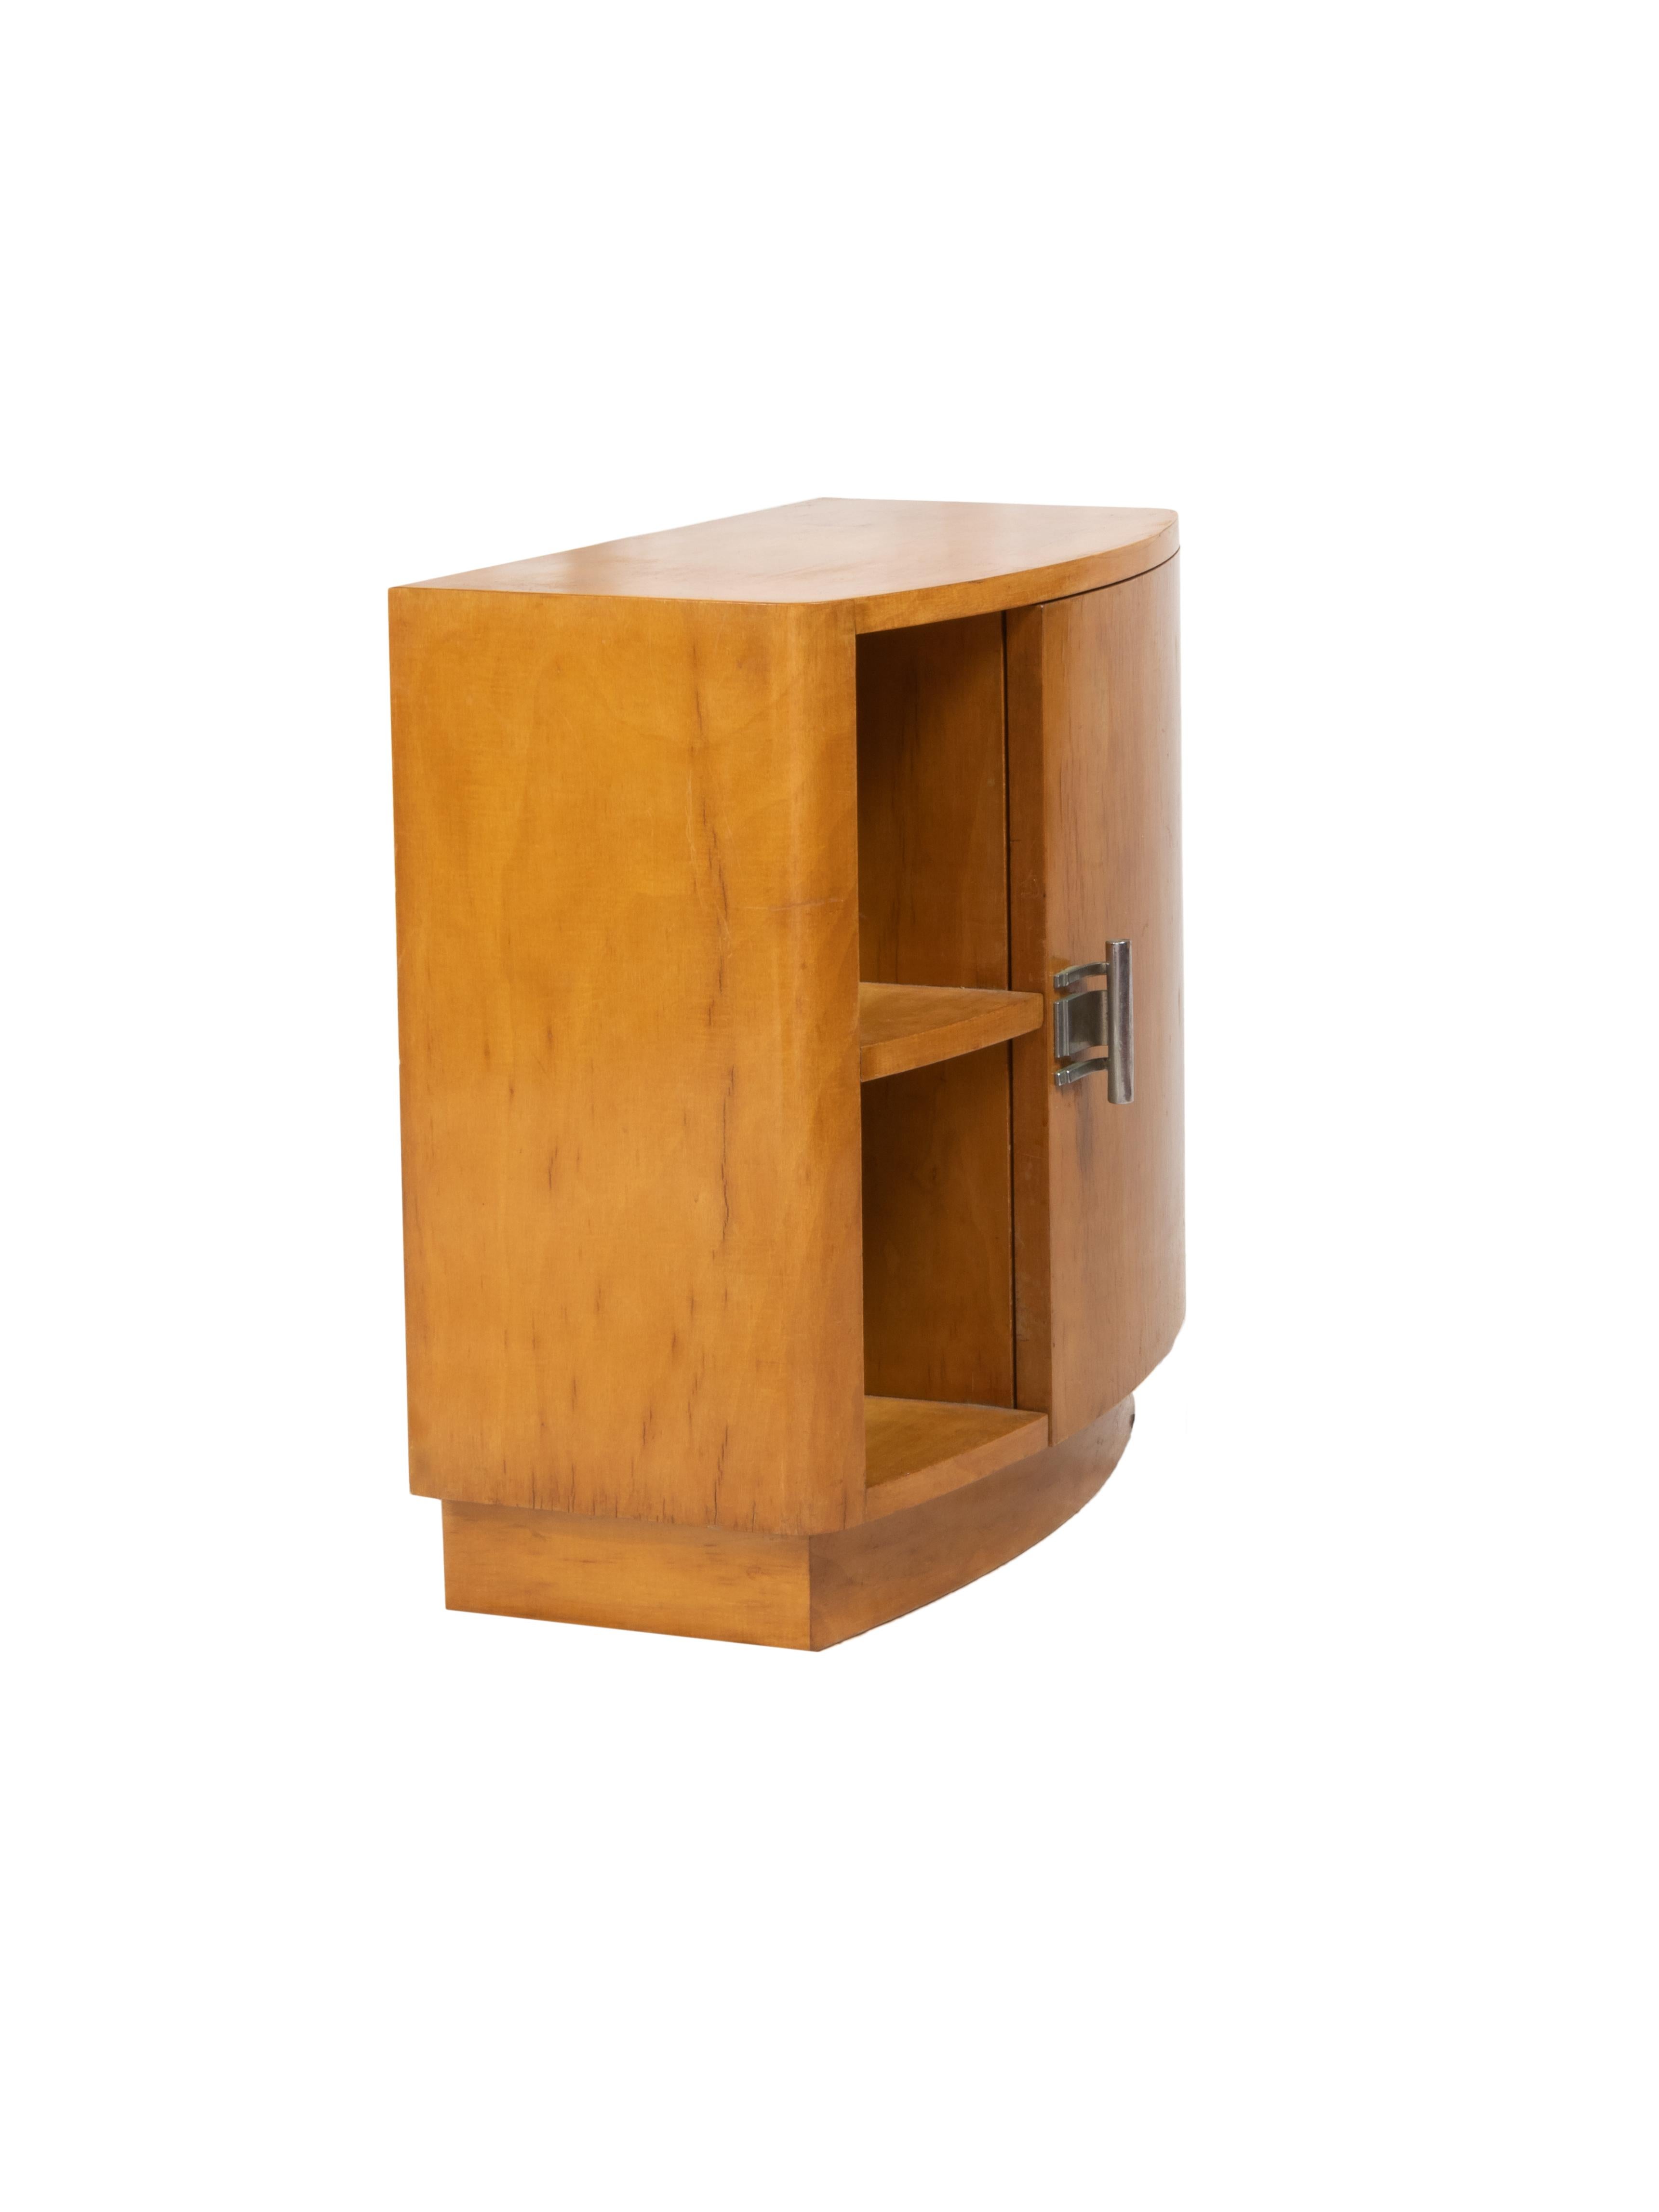 Portuguese Art Deco Spruce Wood Small Commode, 1940s For Sale